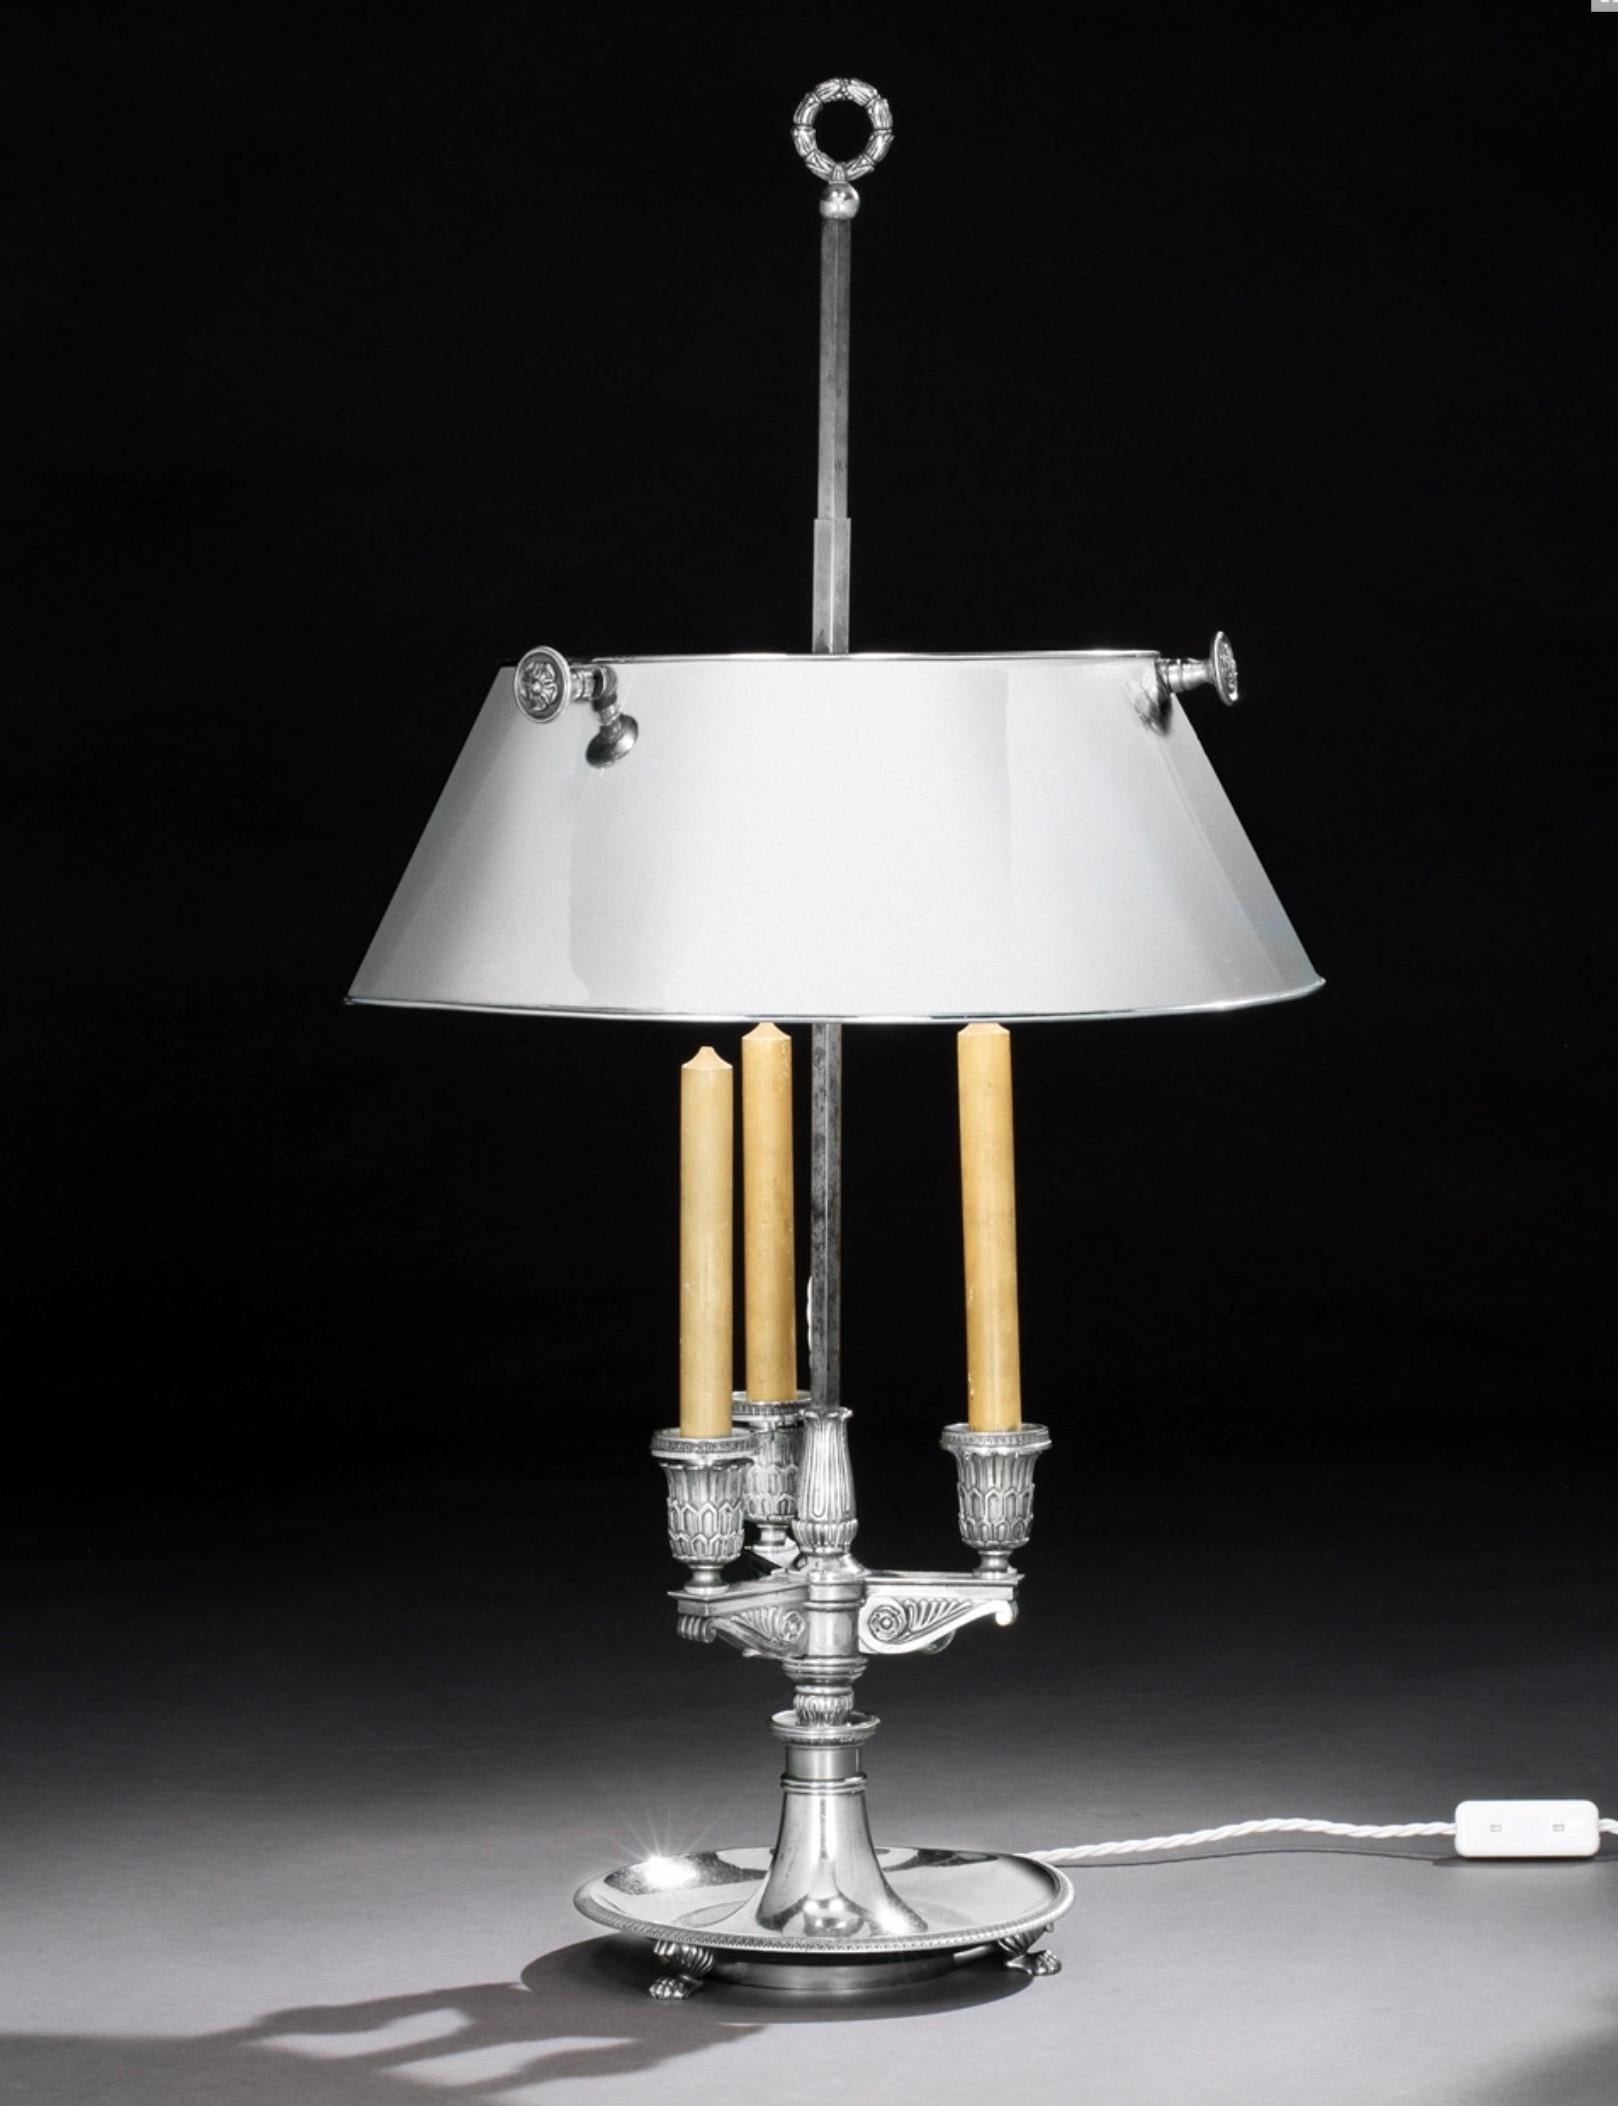 A fine polished steel late 19th century French bouilotte lamp. Wired for electricity - the bulbs hidden within the shade.
Faux candles, and particularly fine quality metalwork. The shade height adjustable. Neo-classical in taste.
Measures: